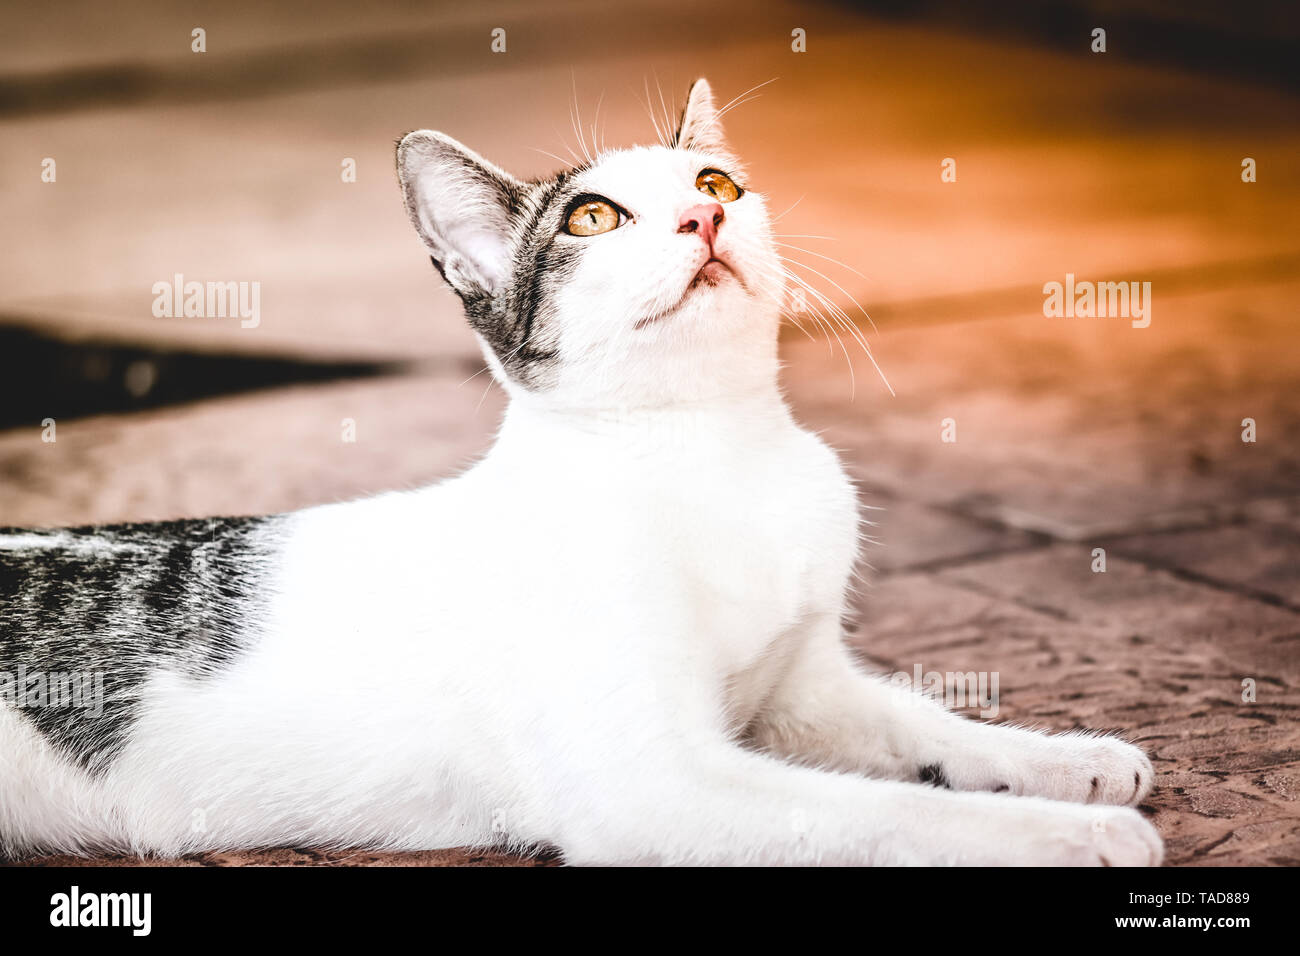 Amazing, fantastic and beautiful cat on the house sidewalk looking up Stock Photo